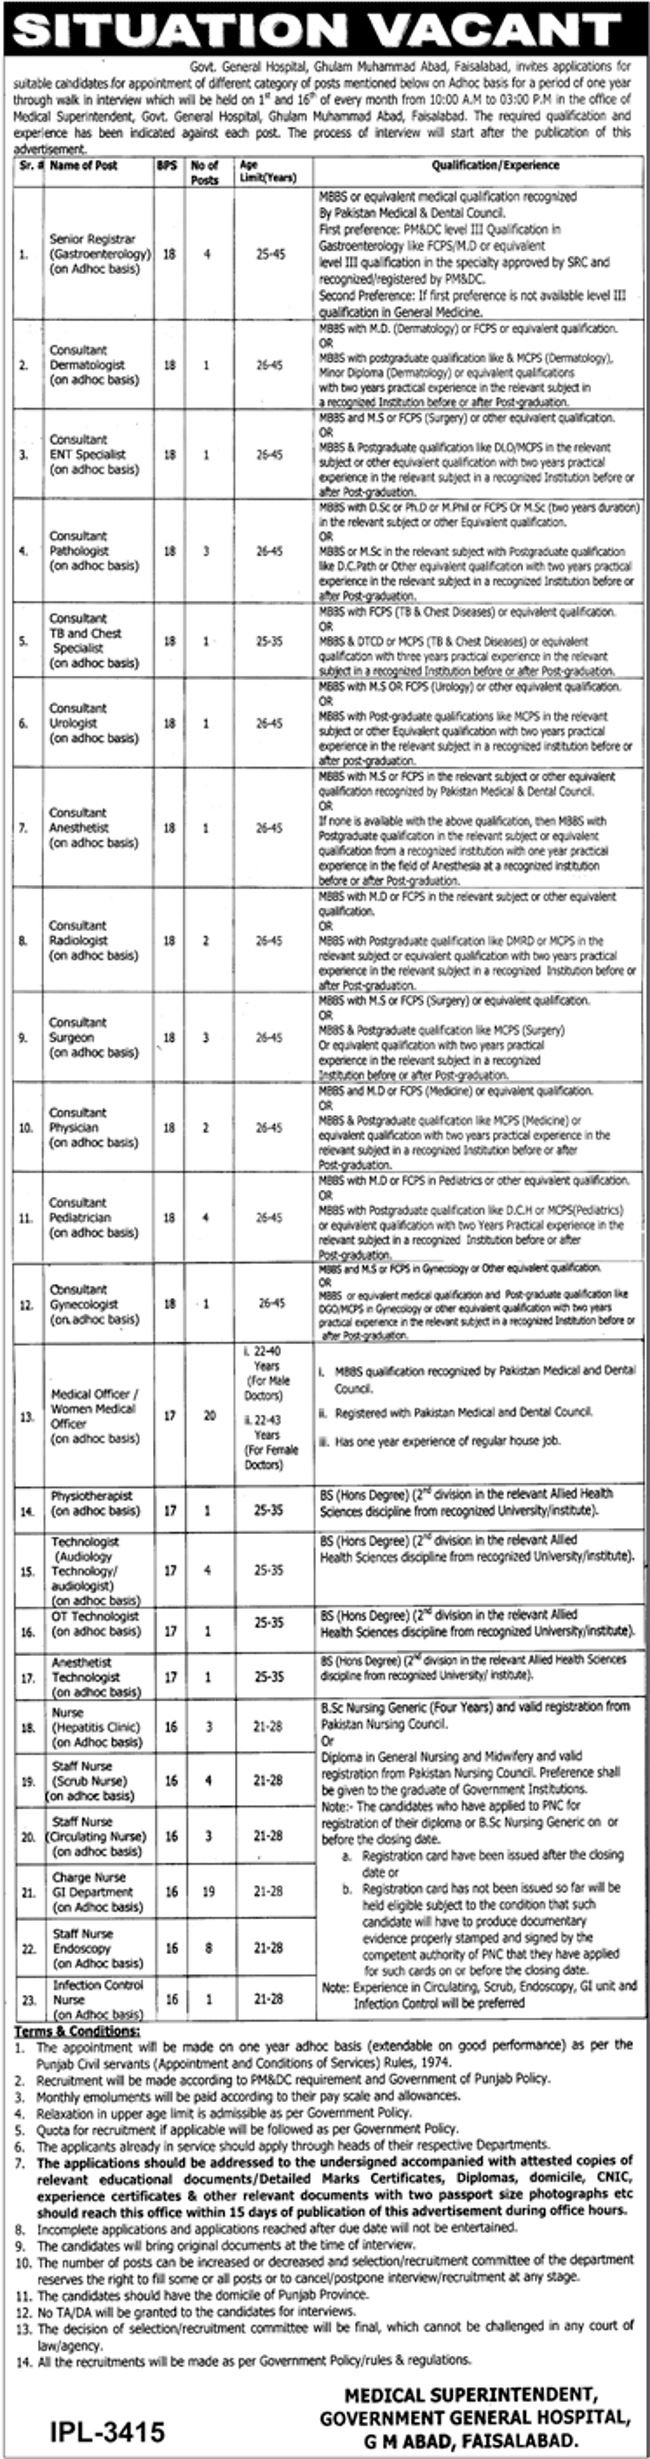 Govt General Hospital Muhammad Abad Faisalabad Jobs 2019 for 89+ Staff Nurses, Medical Officers and Other Healthcare Posts